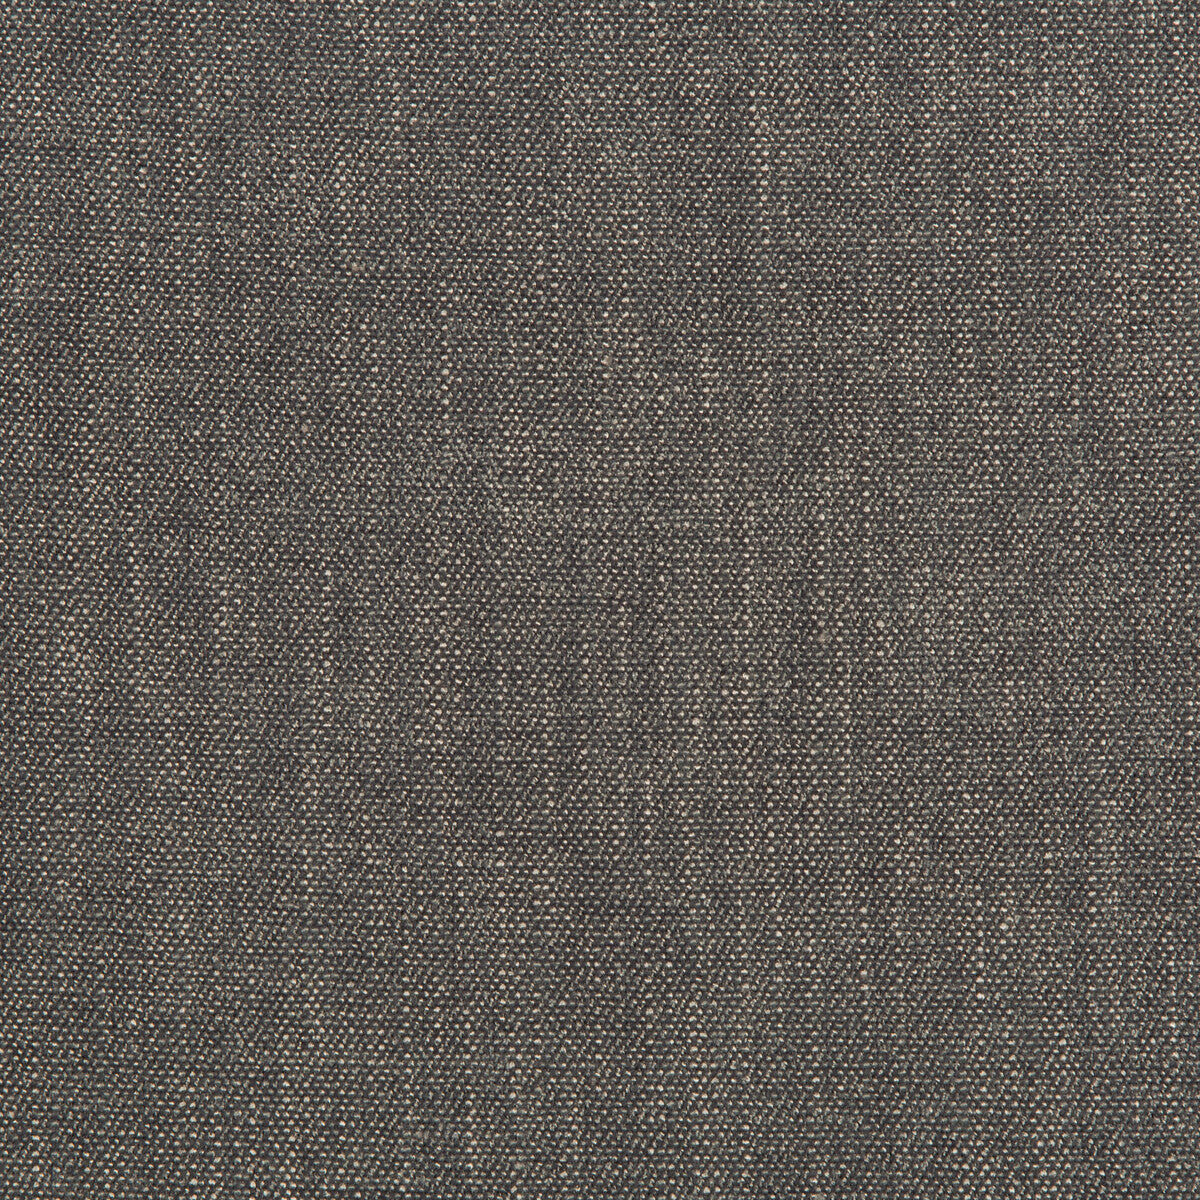 Kravet Couture fabric in 34807-11 color - pattern 34807.11.0 - by Kravet Couture in the Mabley Handler collection